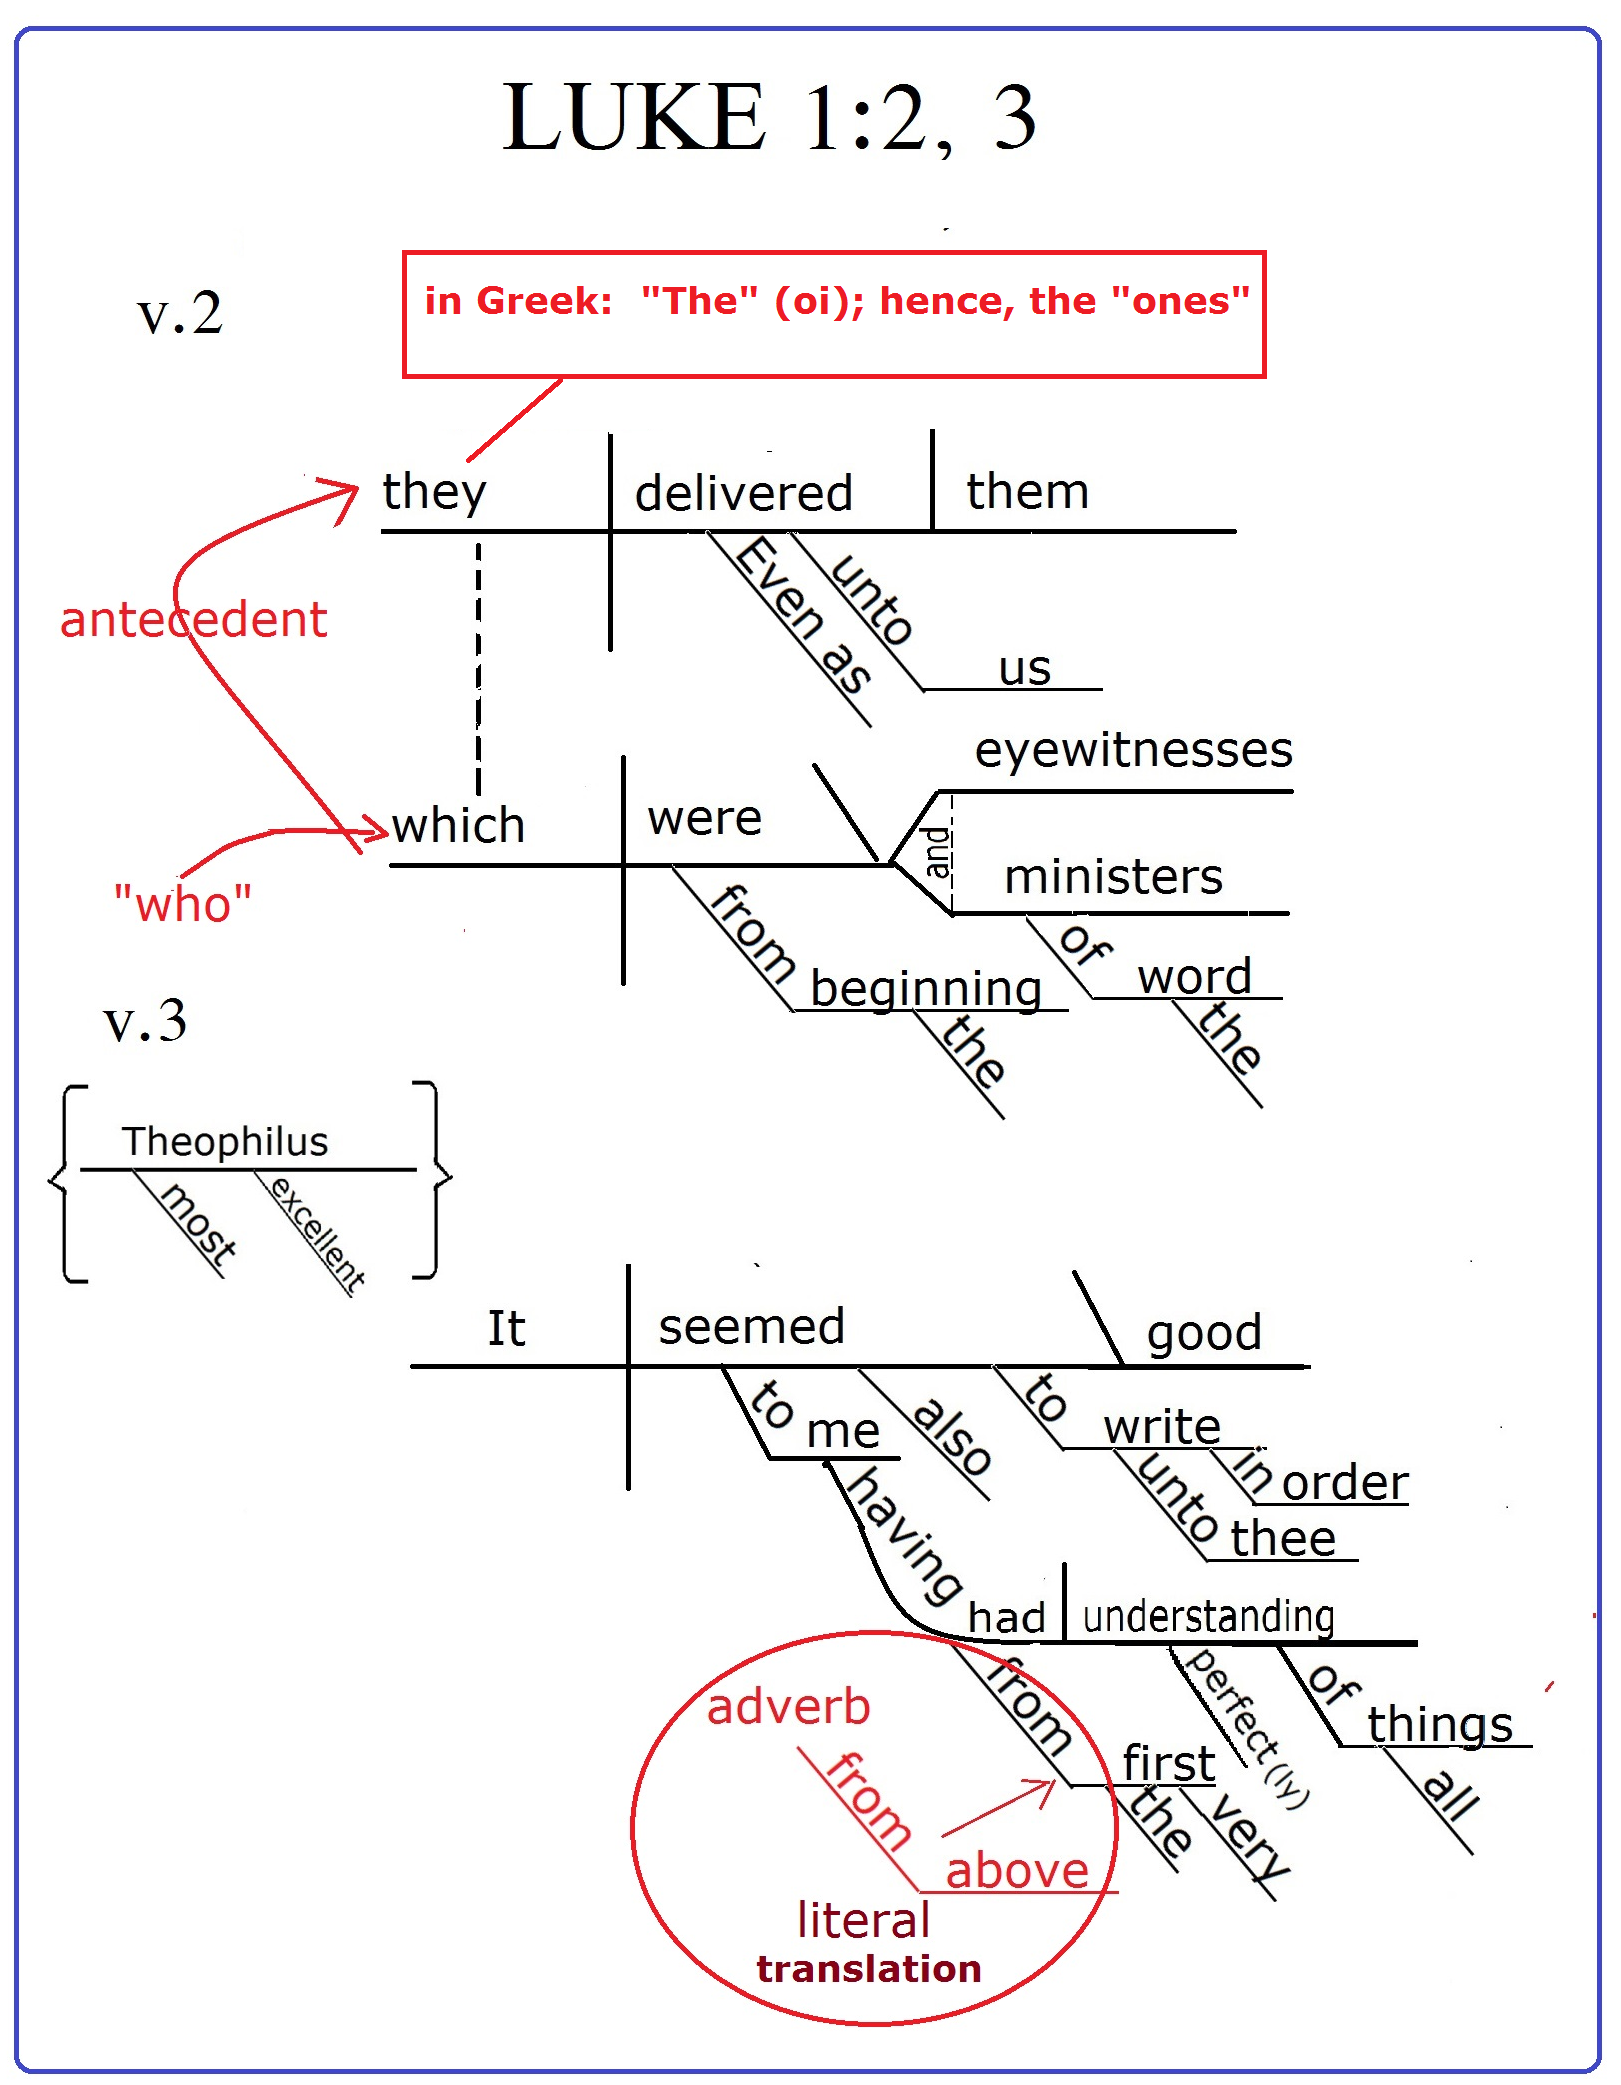 diagram of Luke 1:2,3 Luke received his account 'from above'